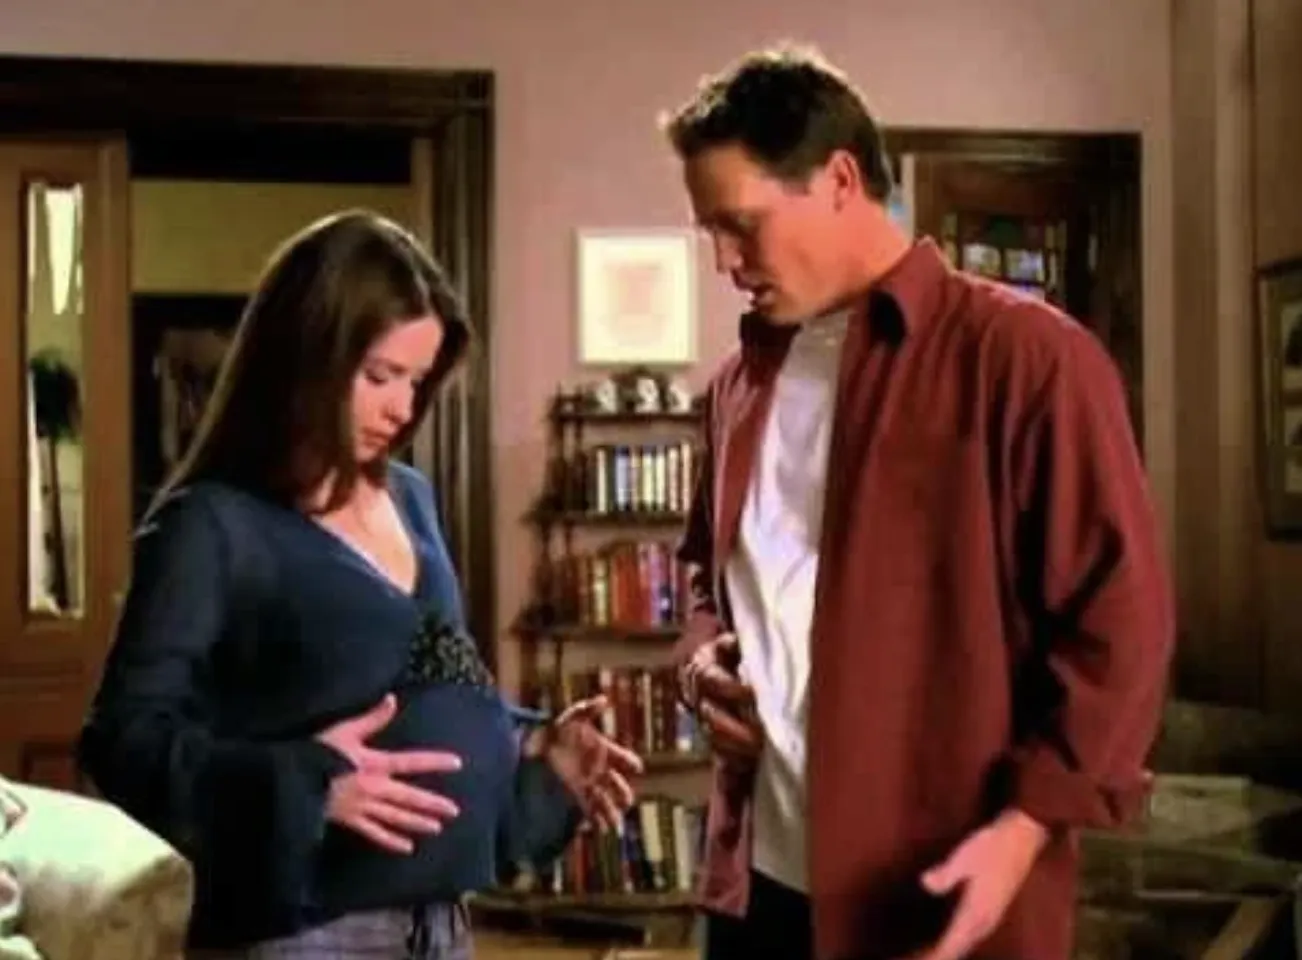 A hidden pregnancy and secret crush: 5 little known facts about Charmed.